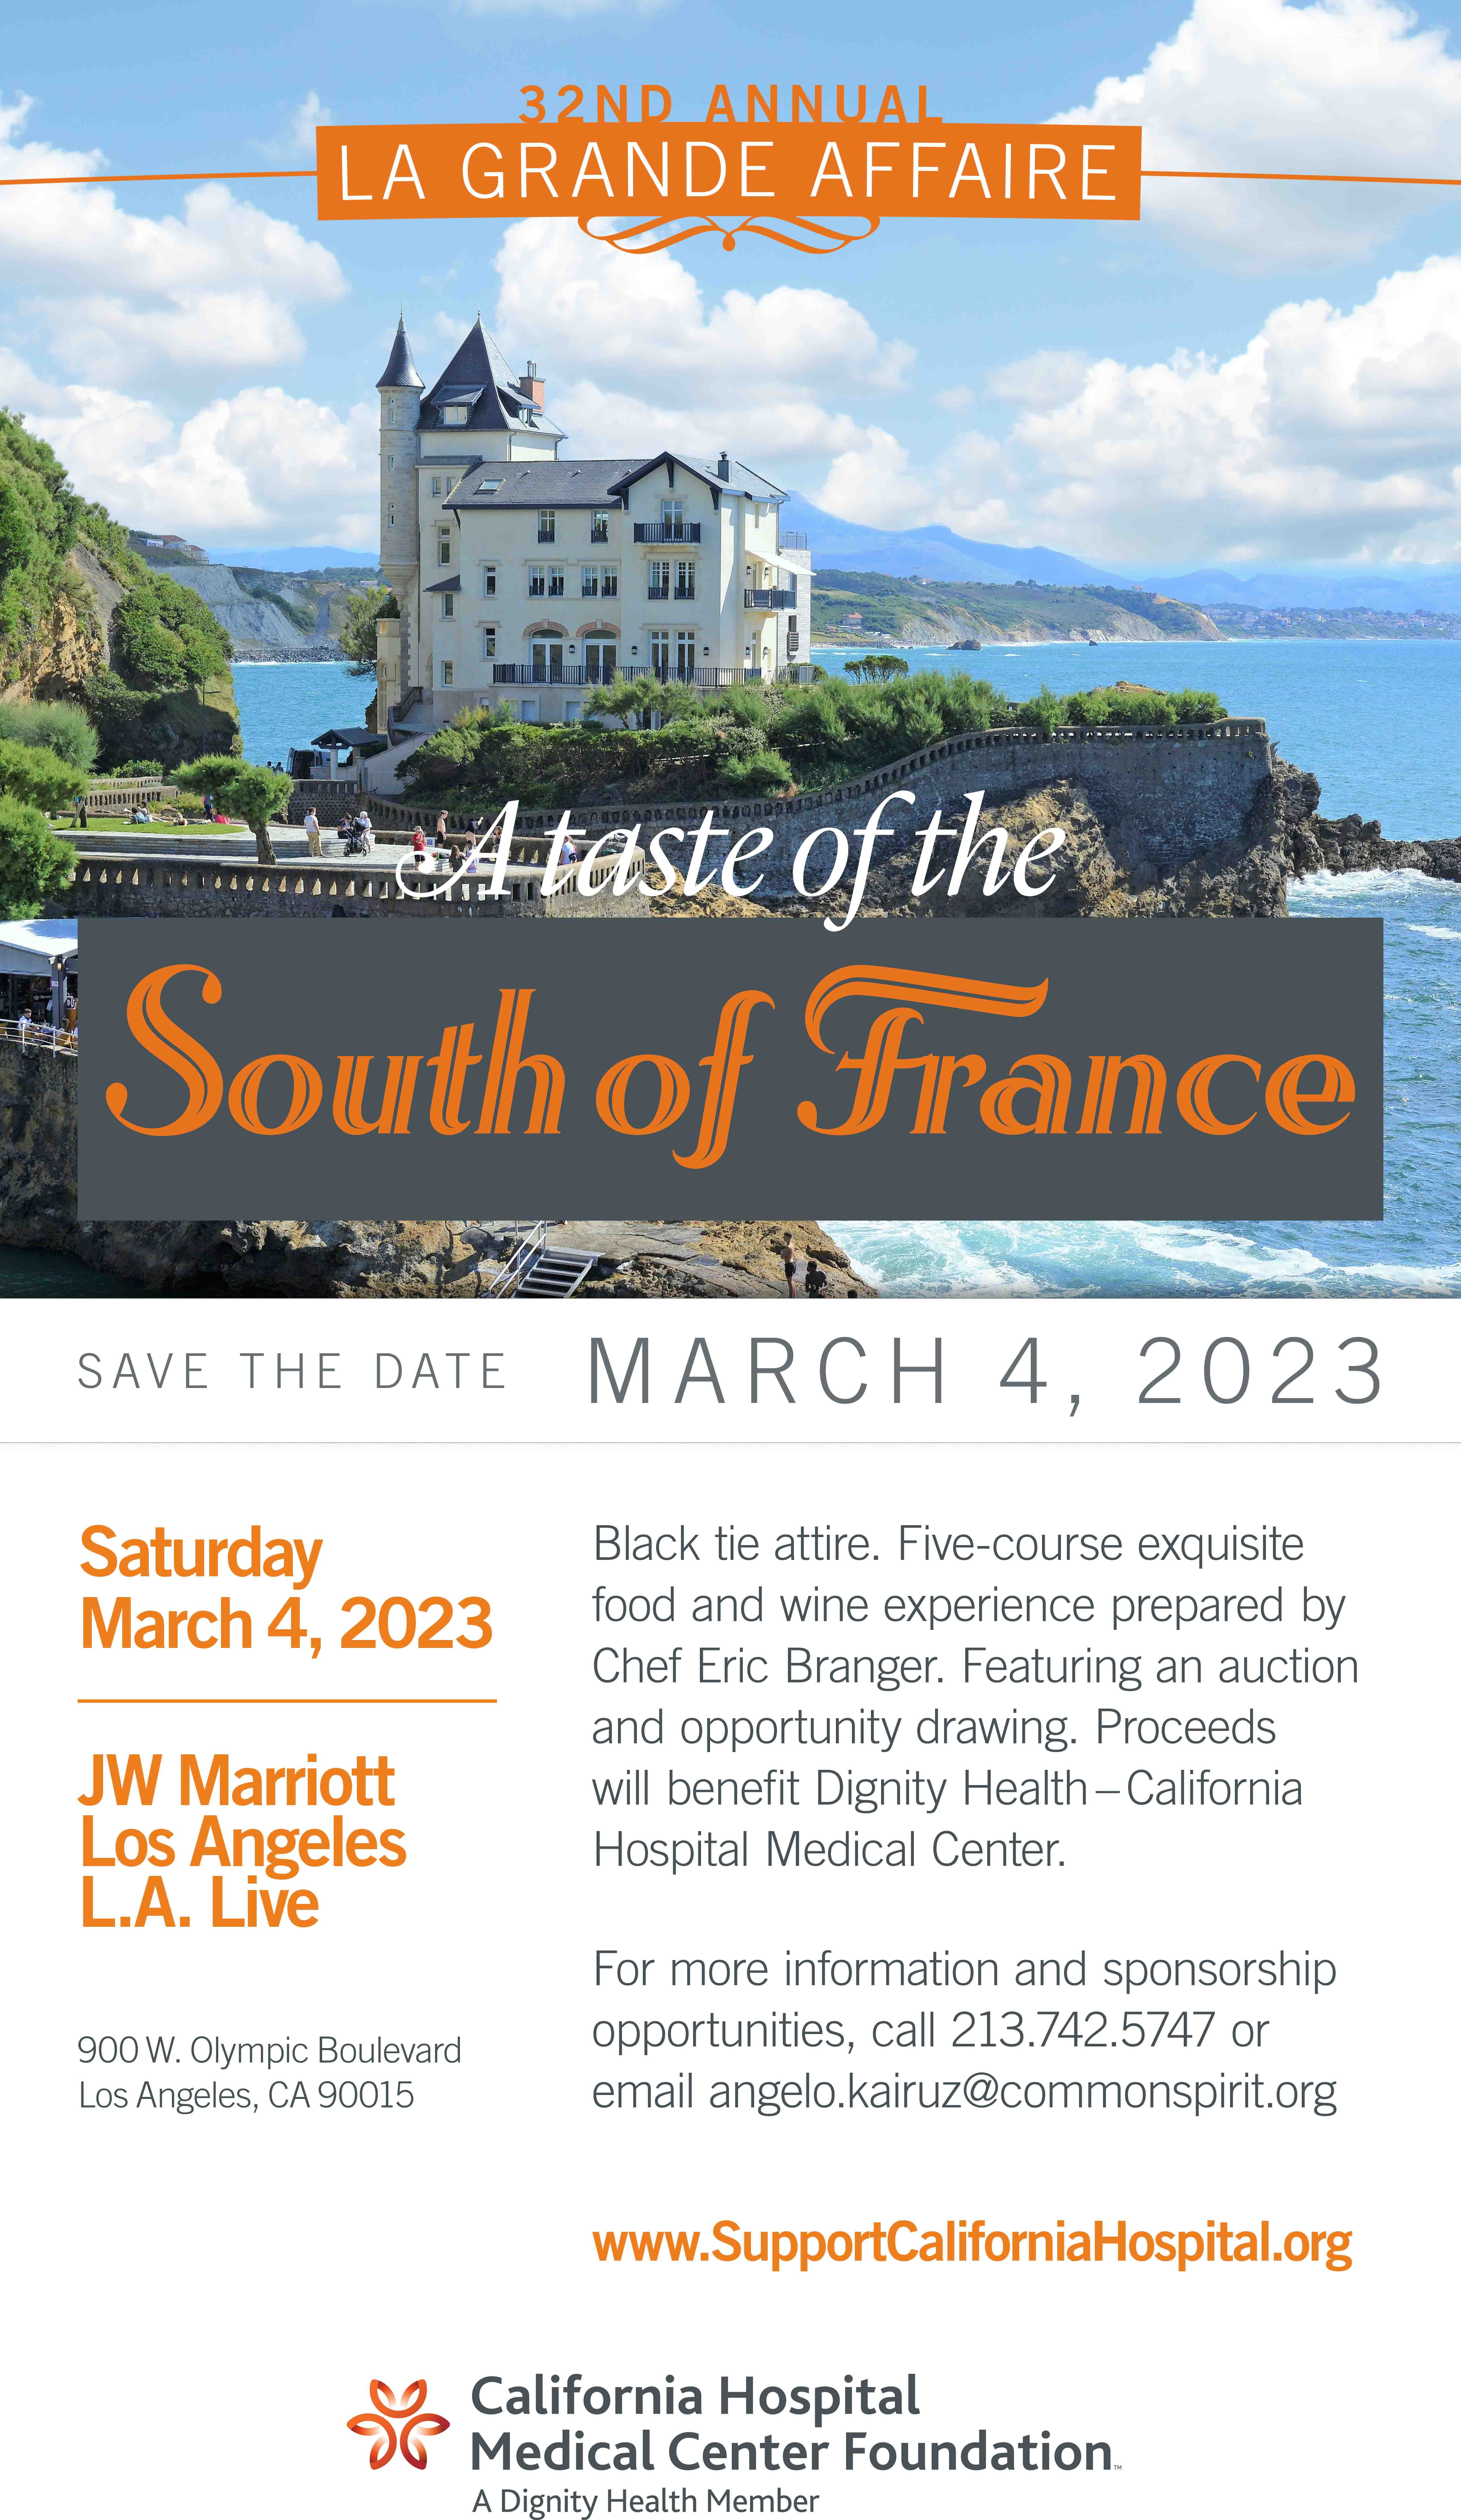 Save the date flyer for the 32nd Annual La Grande Affaire